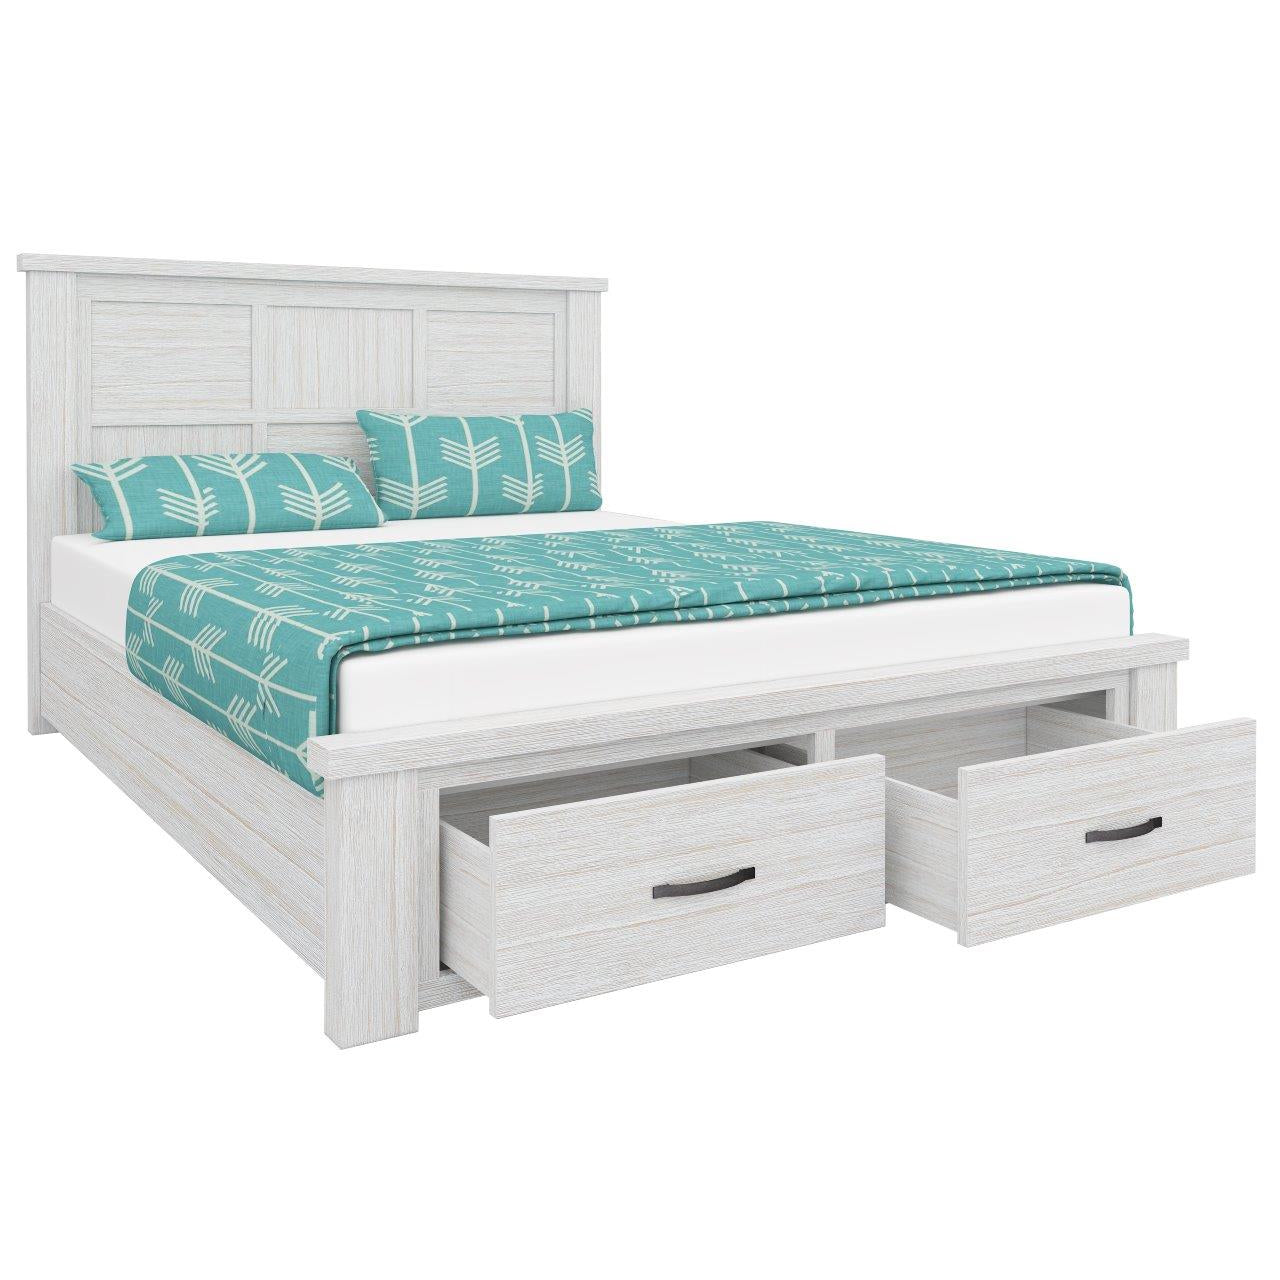 Double Size Bed Frame With Storage Drawers - White